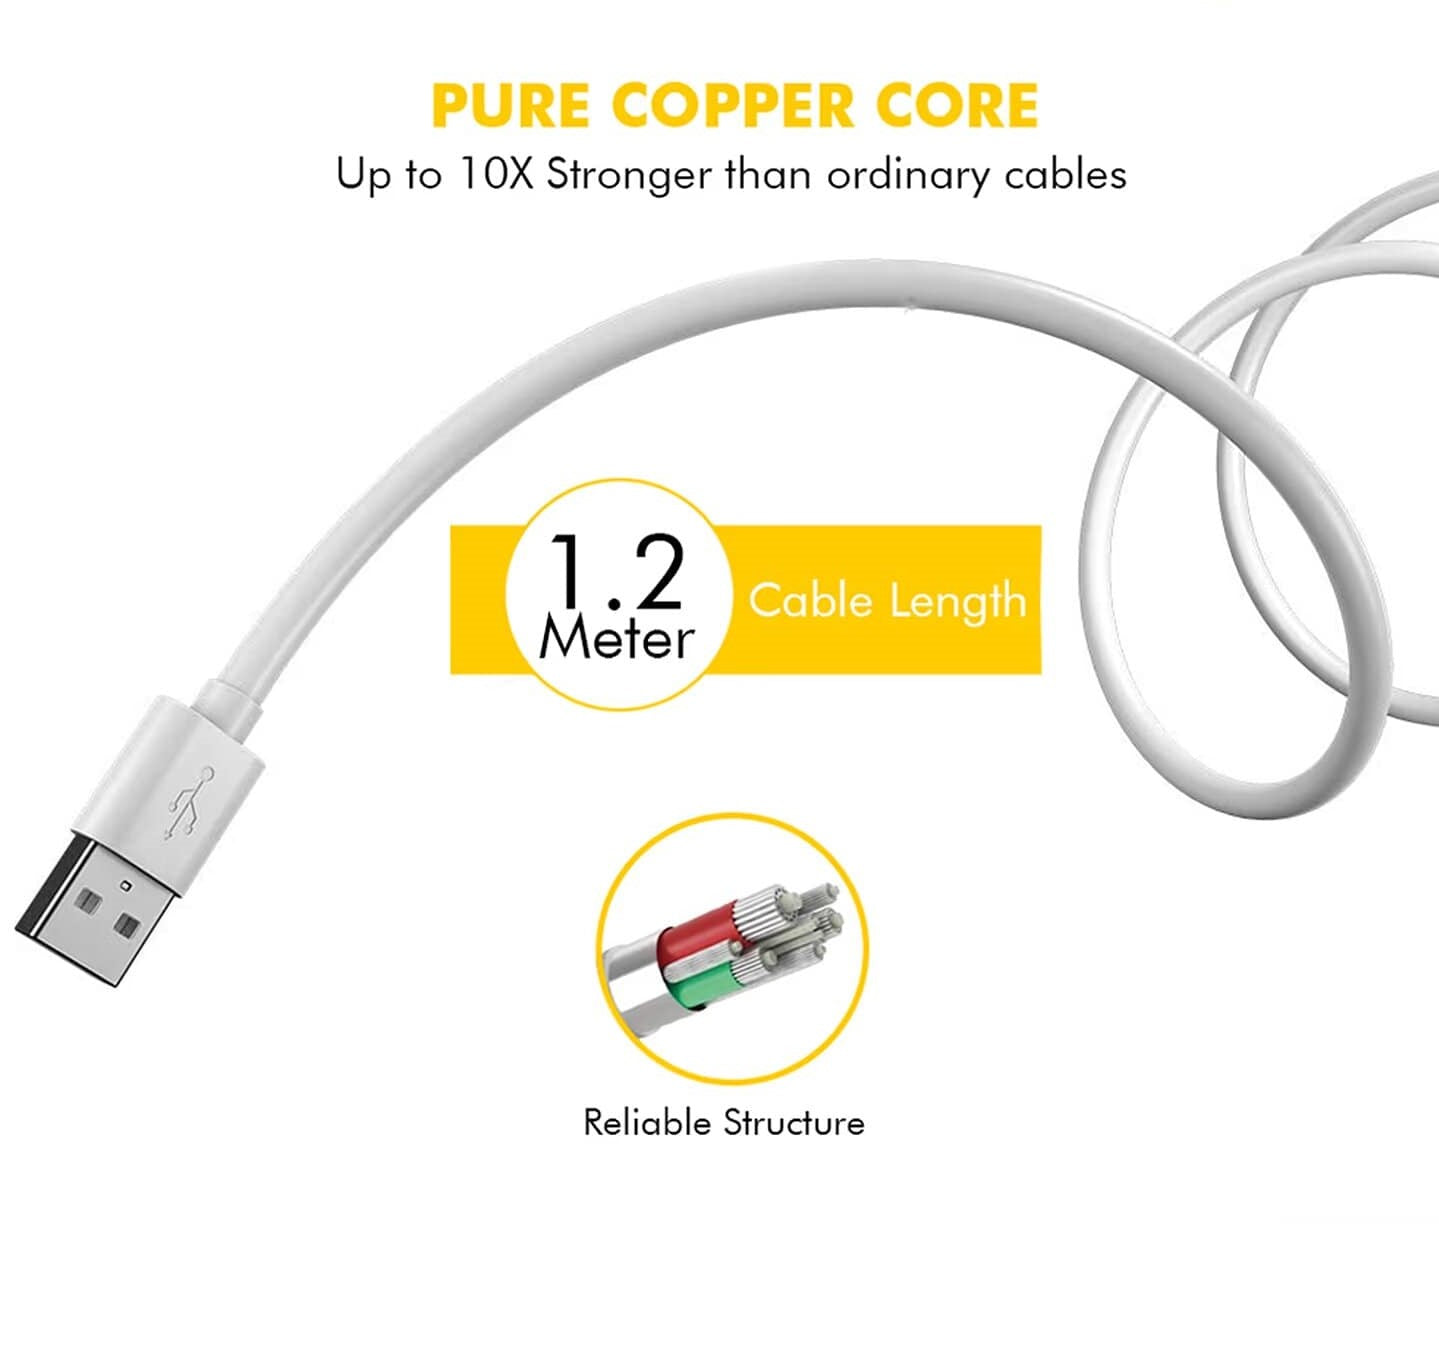 Redmi A1 Plus Support 10W Fast Charge MicroUsb Cable White